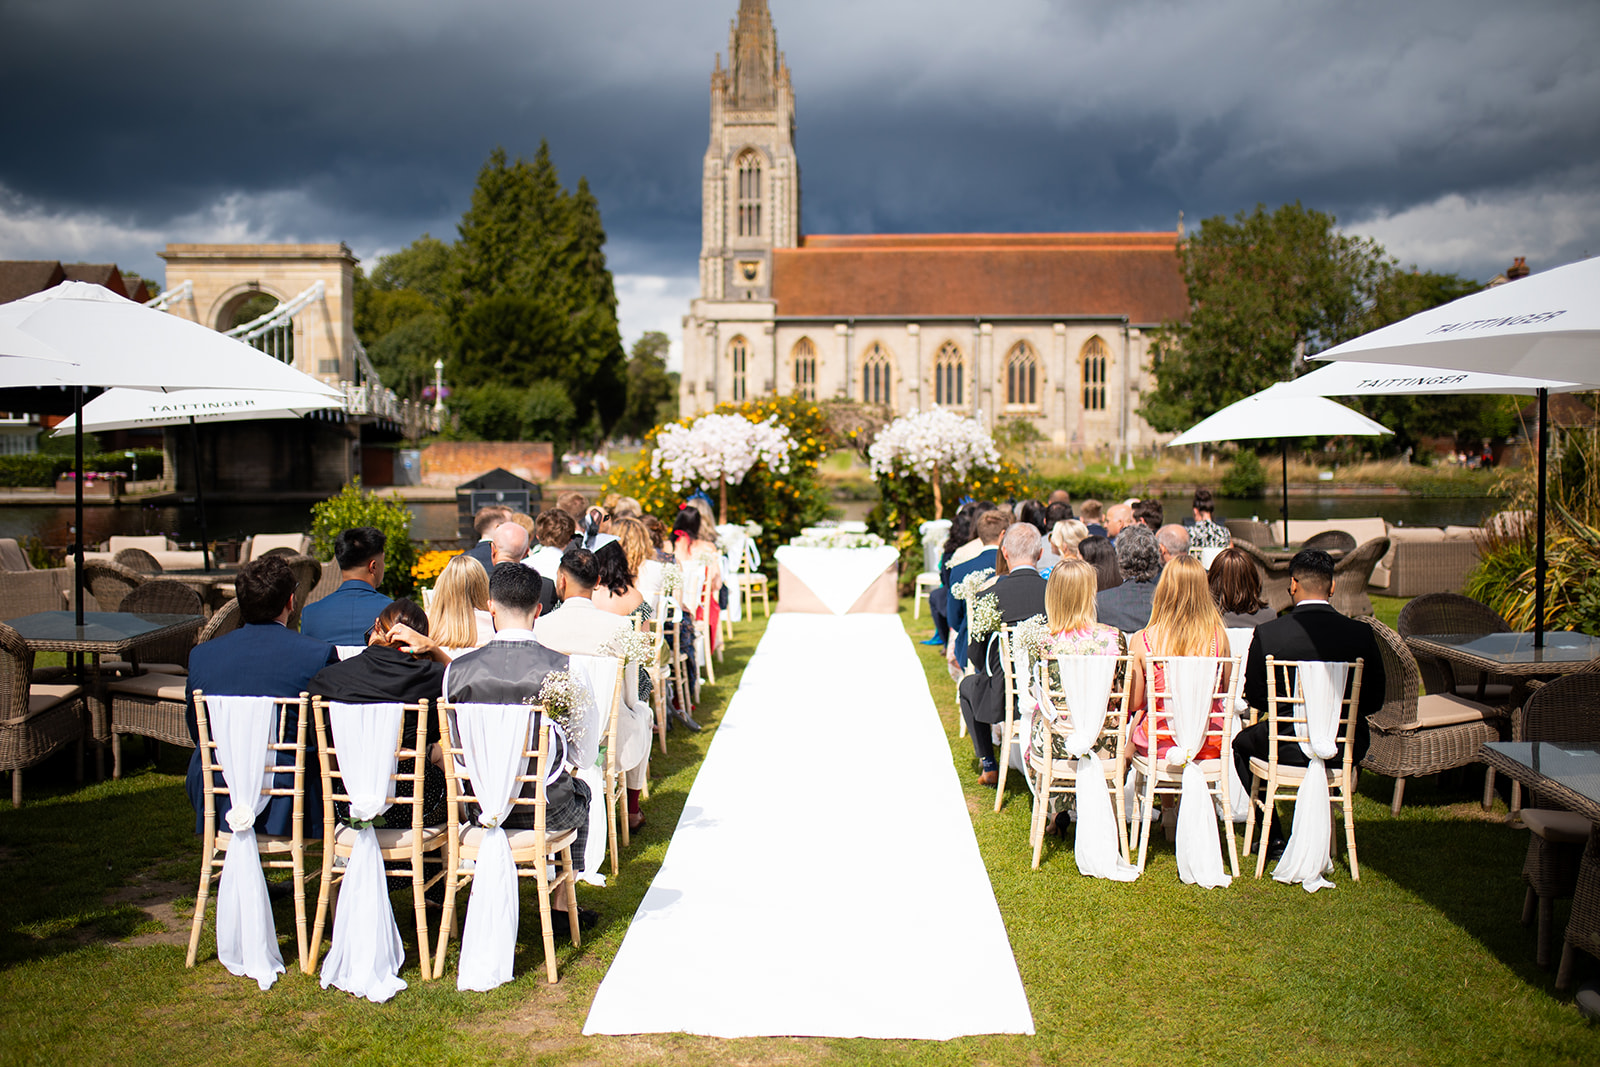 the compleat angler outdoor wedding setup marlow church